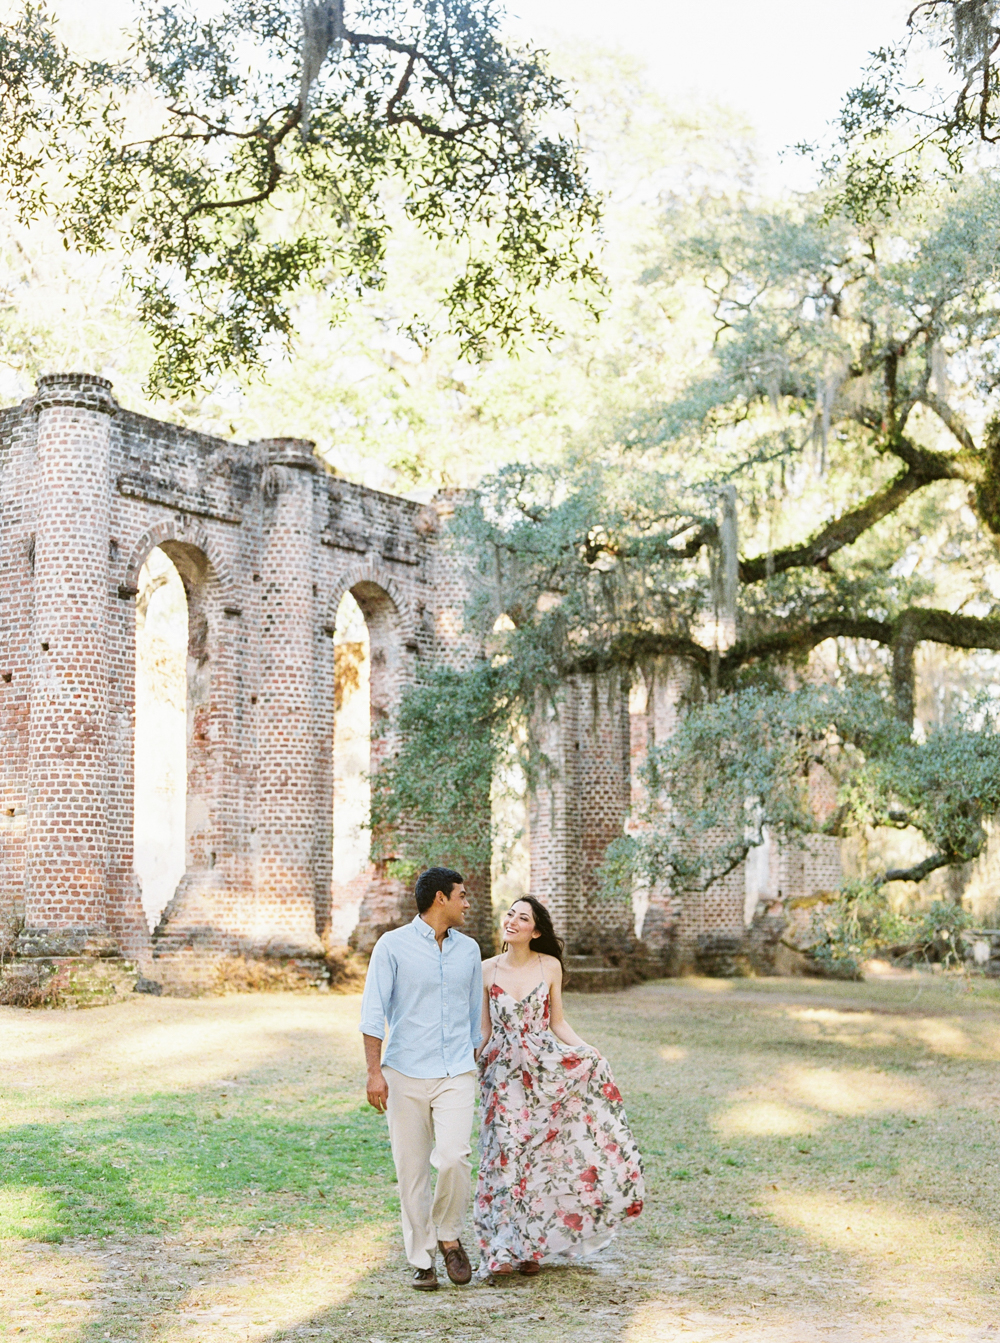 Old Sheldon Church Ruins Engagement Photography